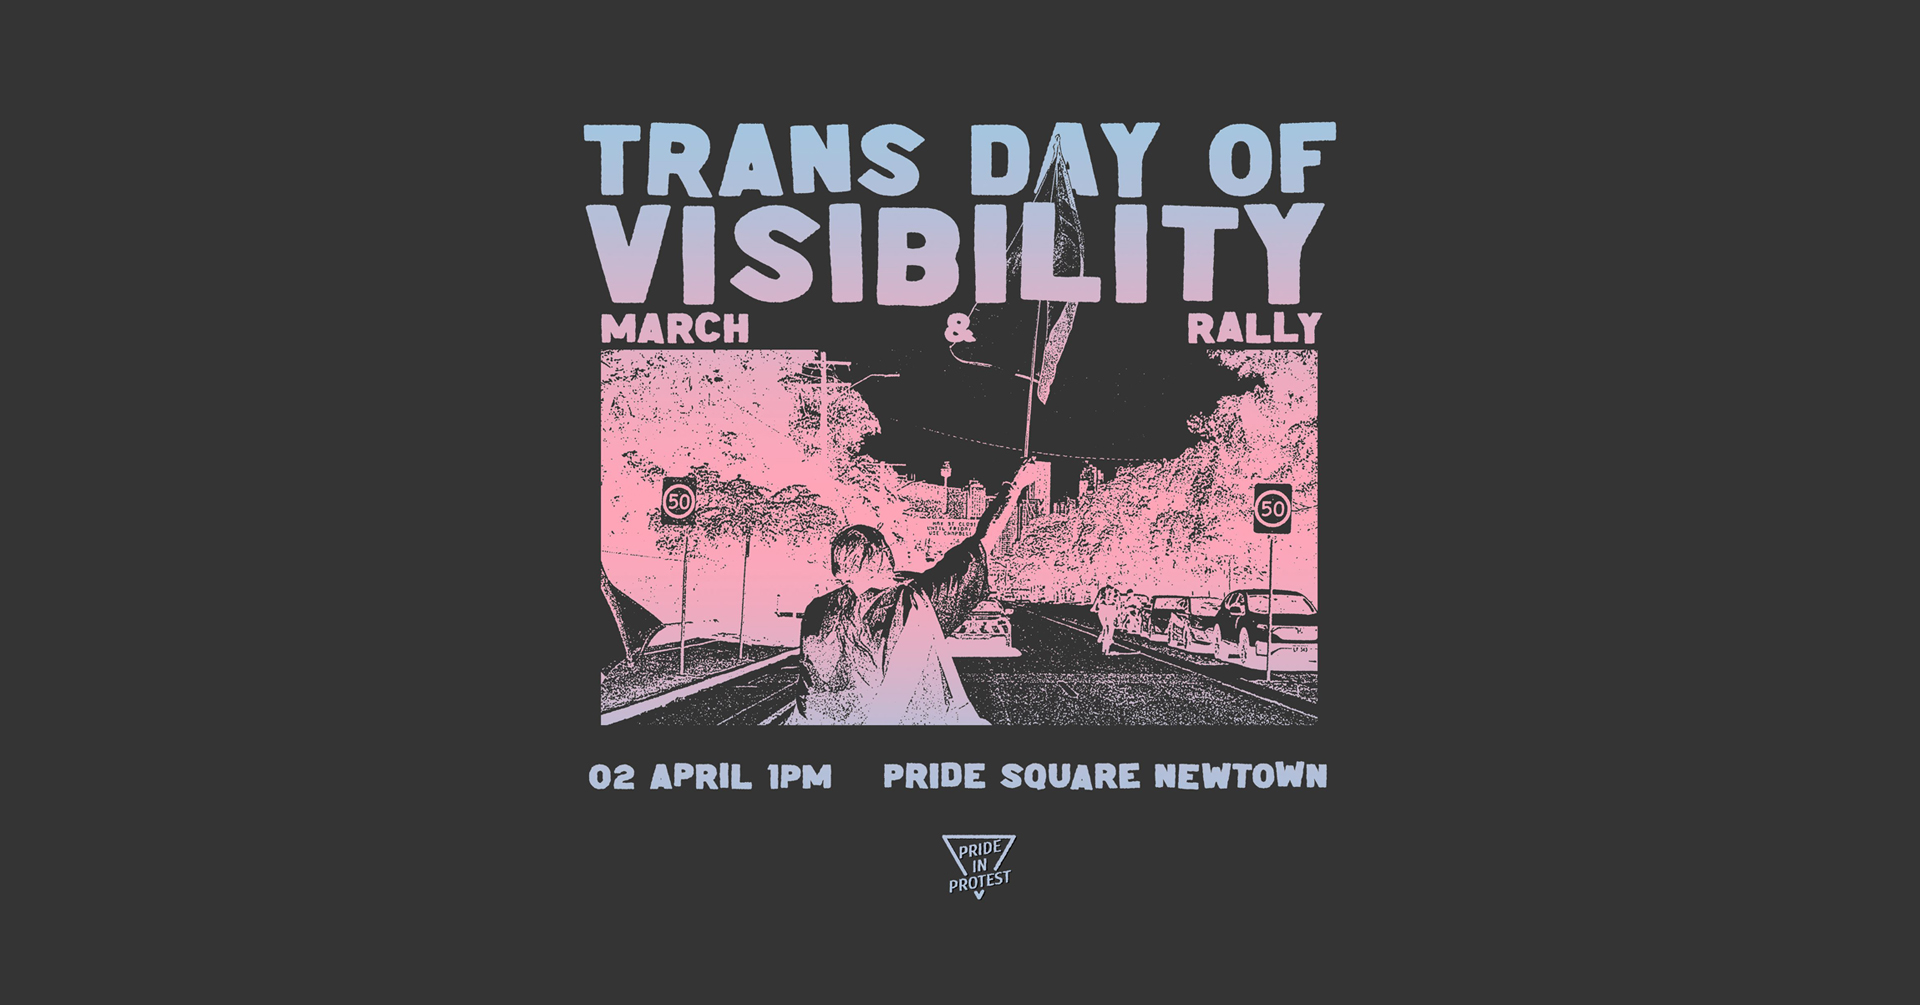 The poster for Sydney’s Trans Day of Visibility Rally